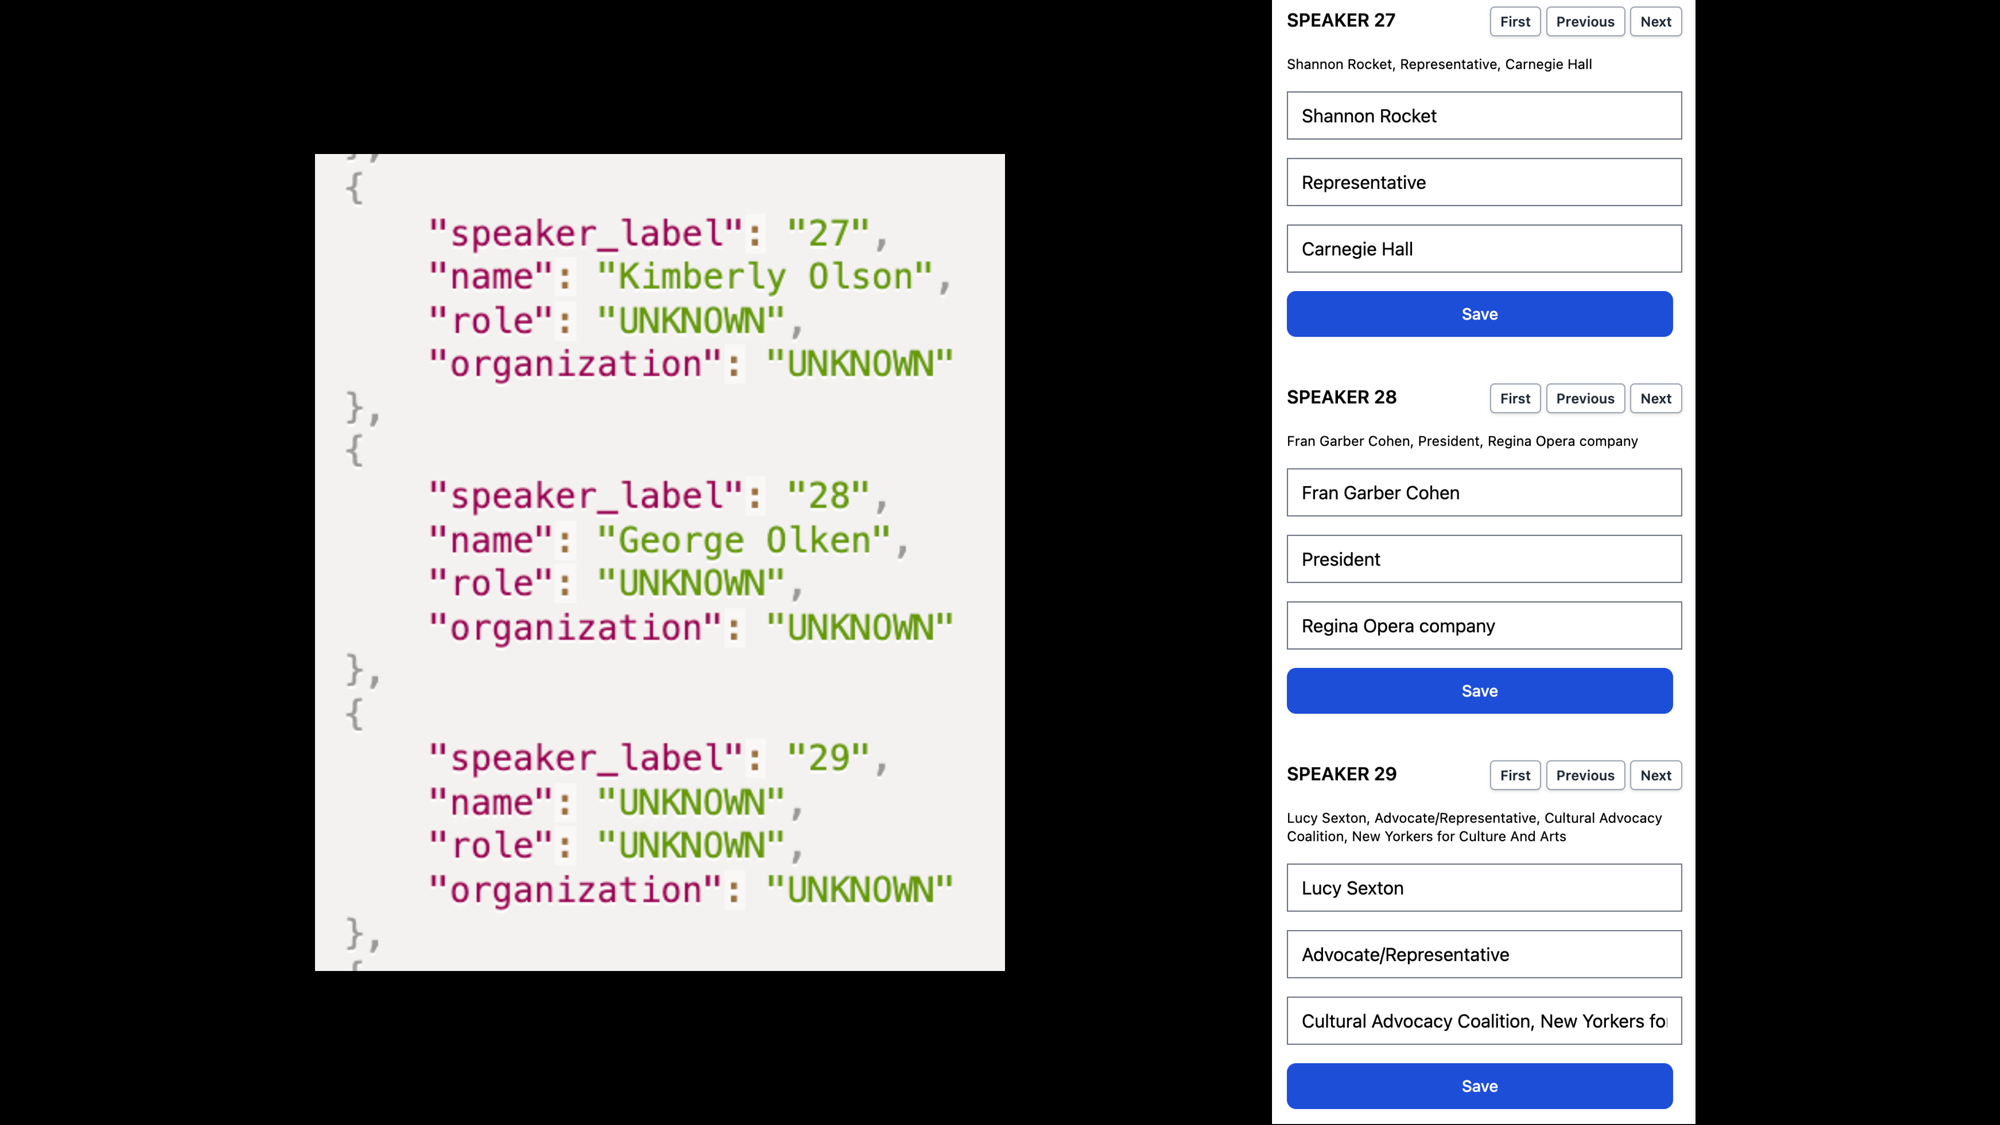 A JSON list of three identified speakers with fields speaker_label, name, role, and organization. On the right, a screenshot of the correct names, roles, and organizations for the same speakers.